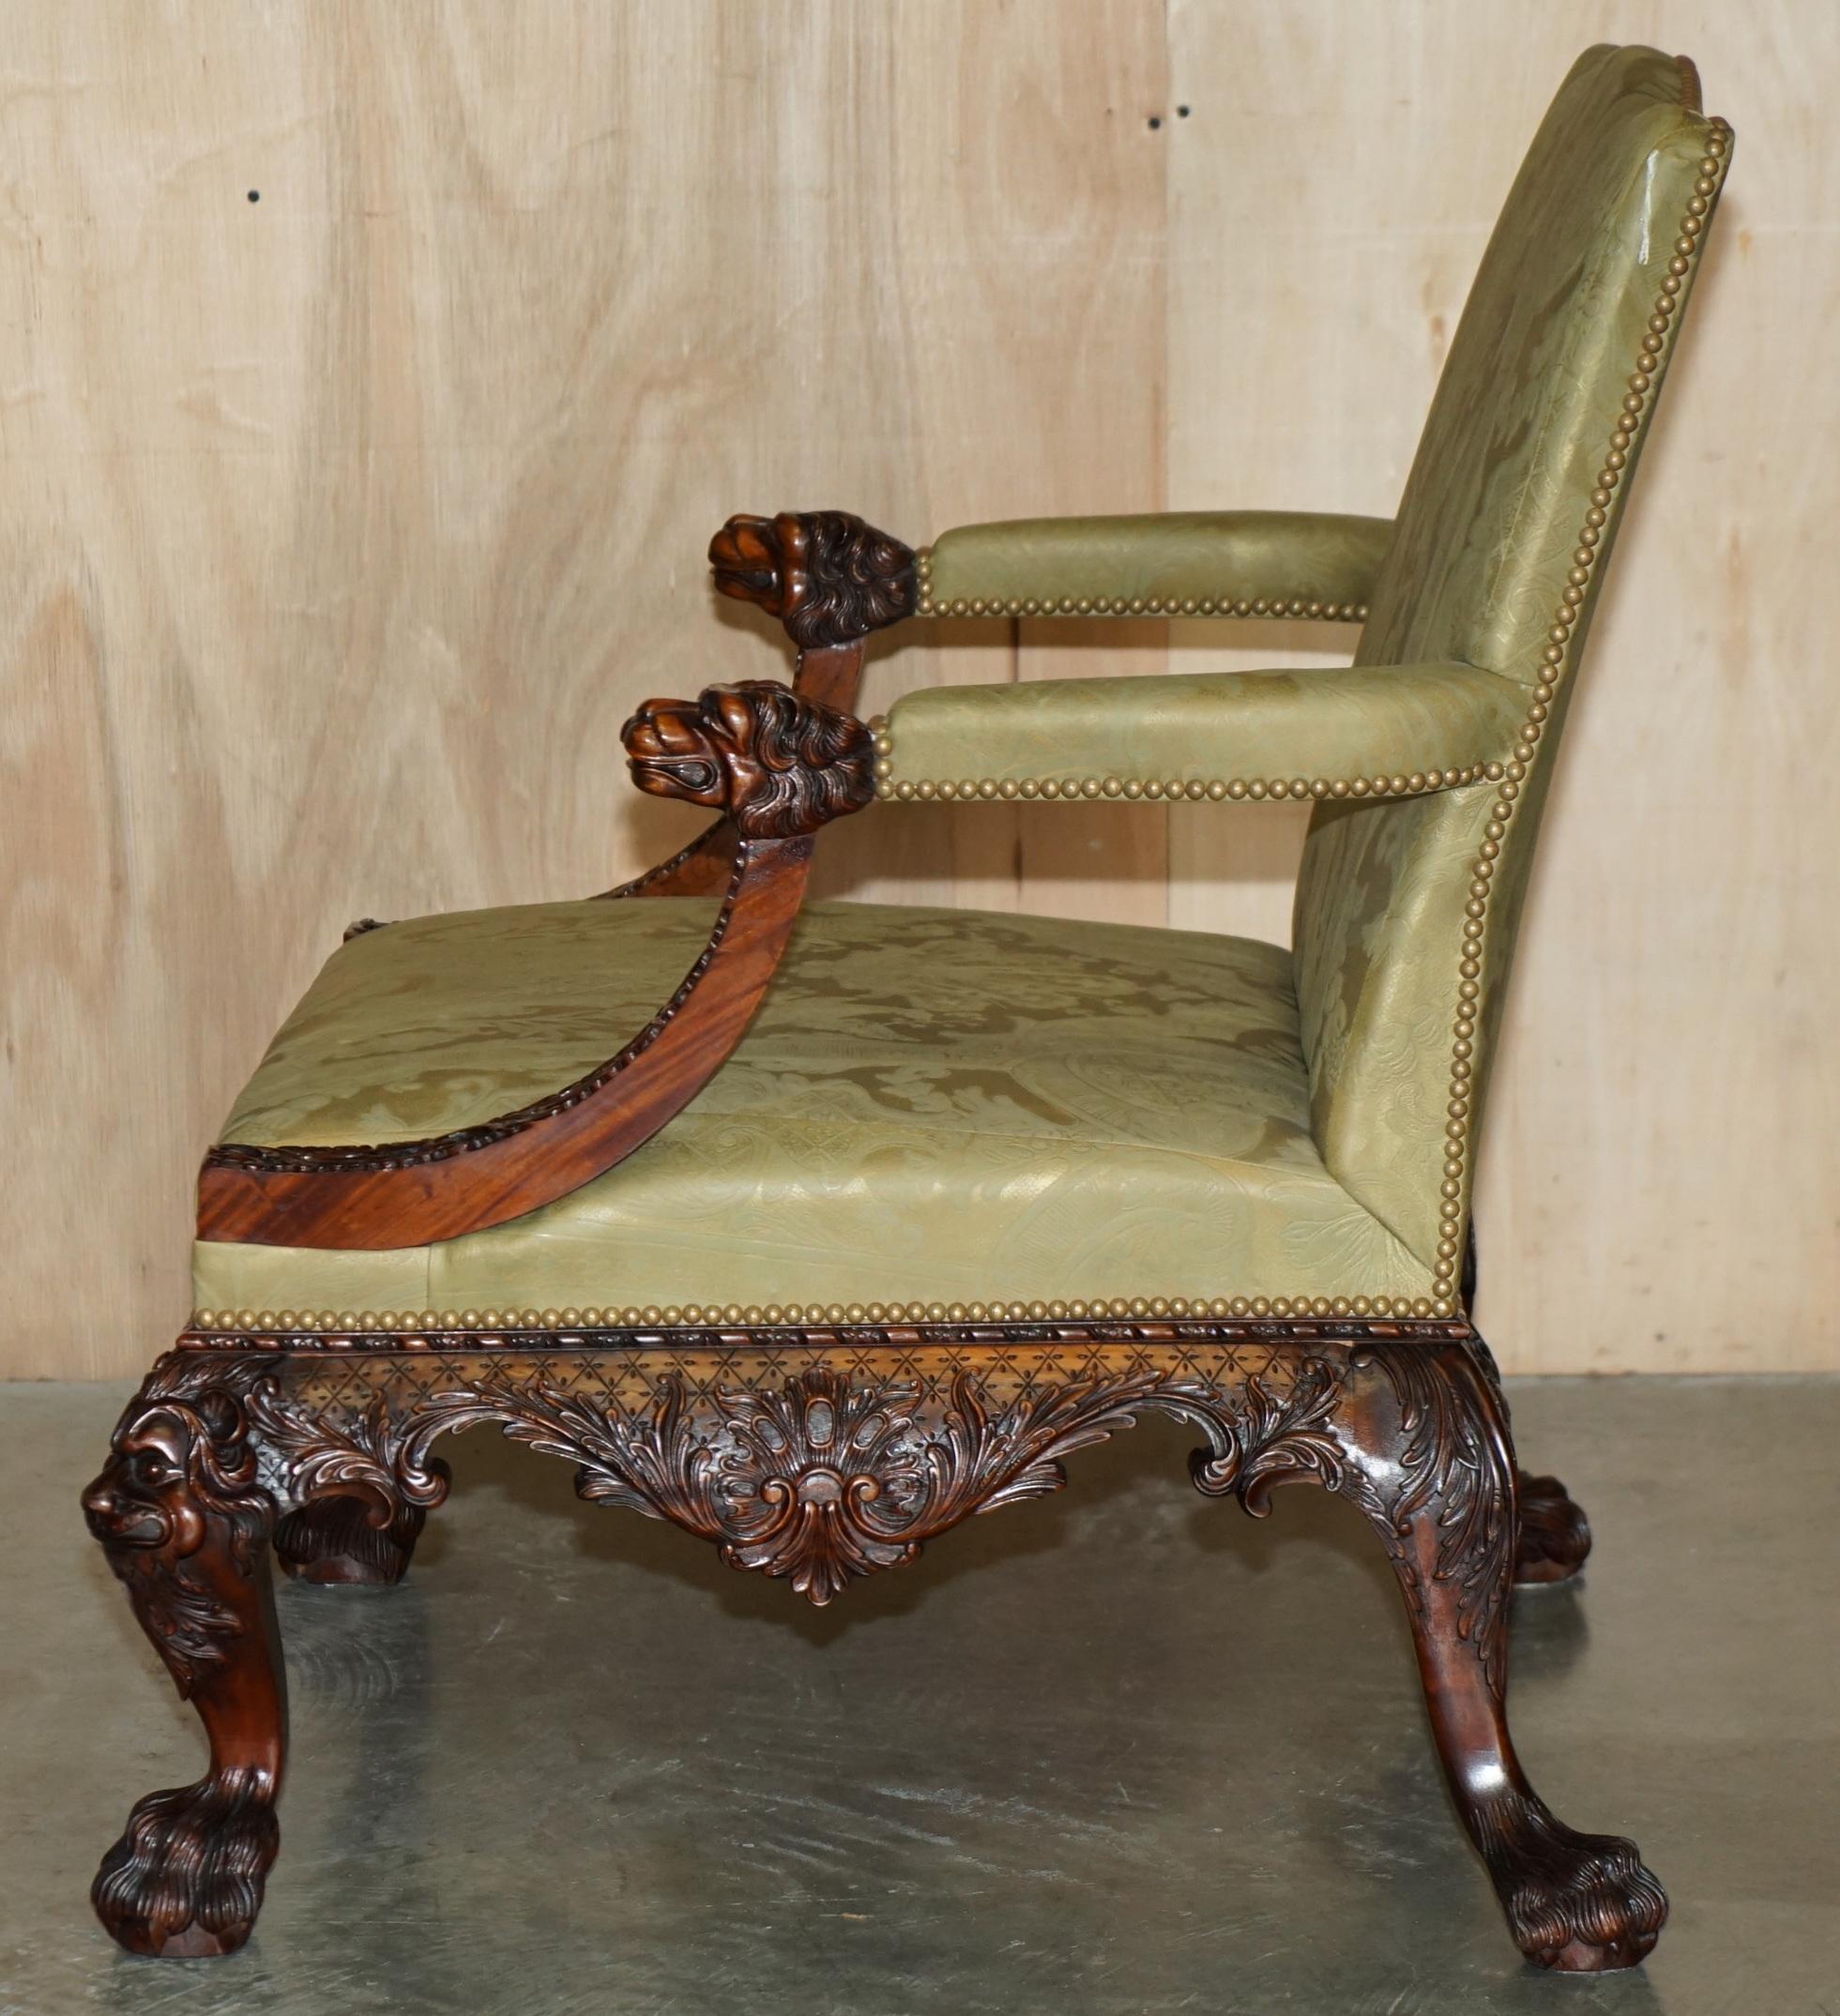 FINE PAiR OF LARGE CARved GAINSBOROUGH ARMCHAIRS AFTER GILES GRENDEY 1693-1780 im Angebot 10